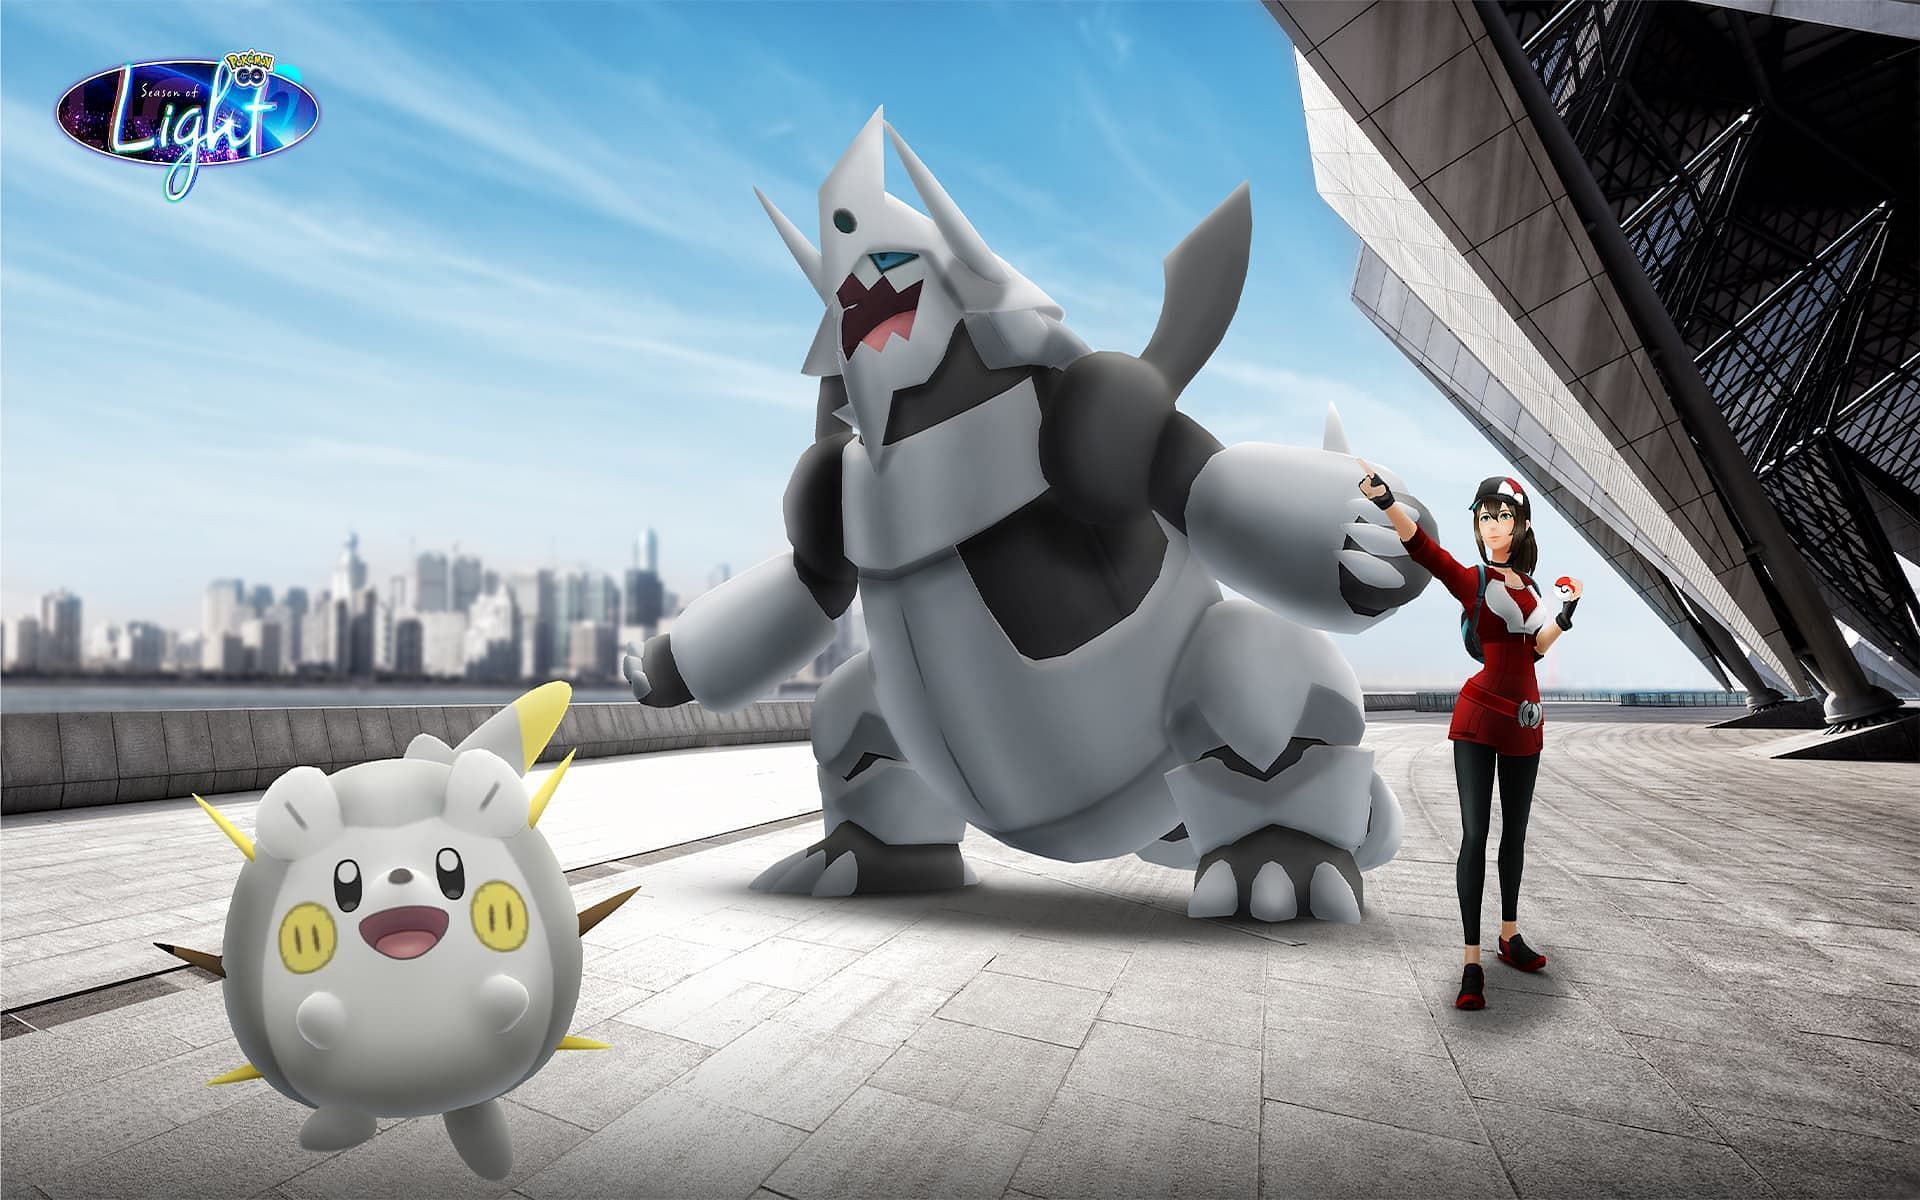 Pokemon GO is gearing up for another themed event (Image via Niantic)